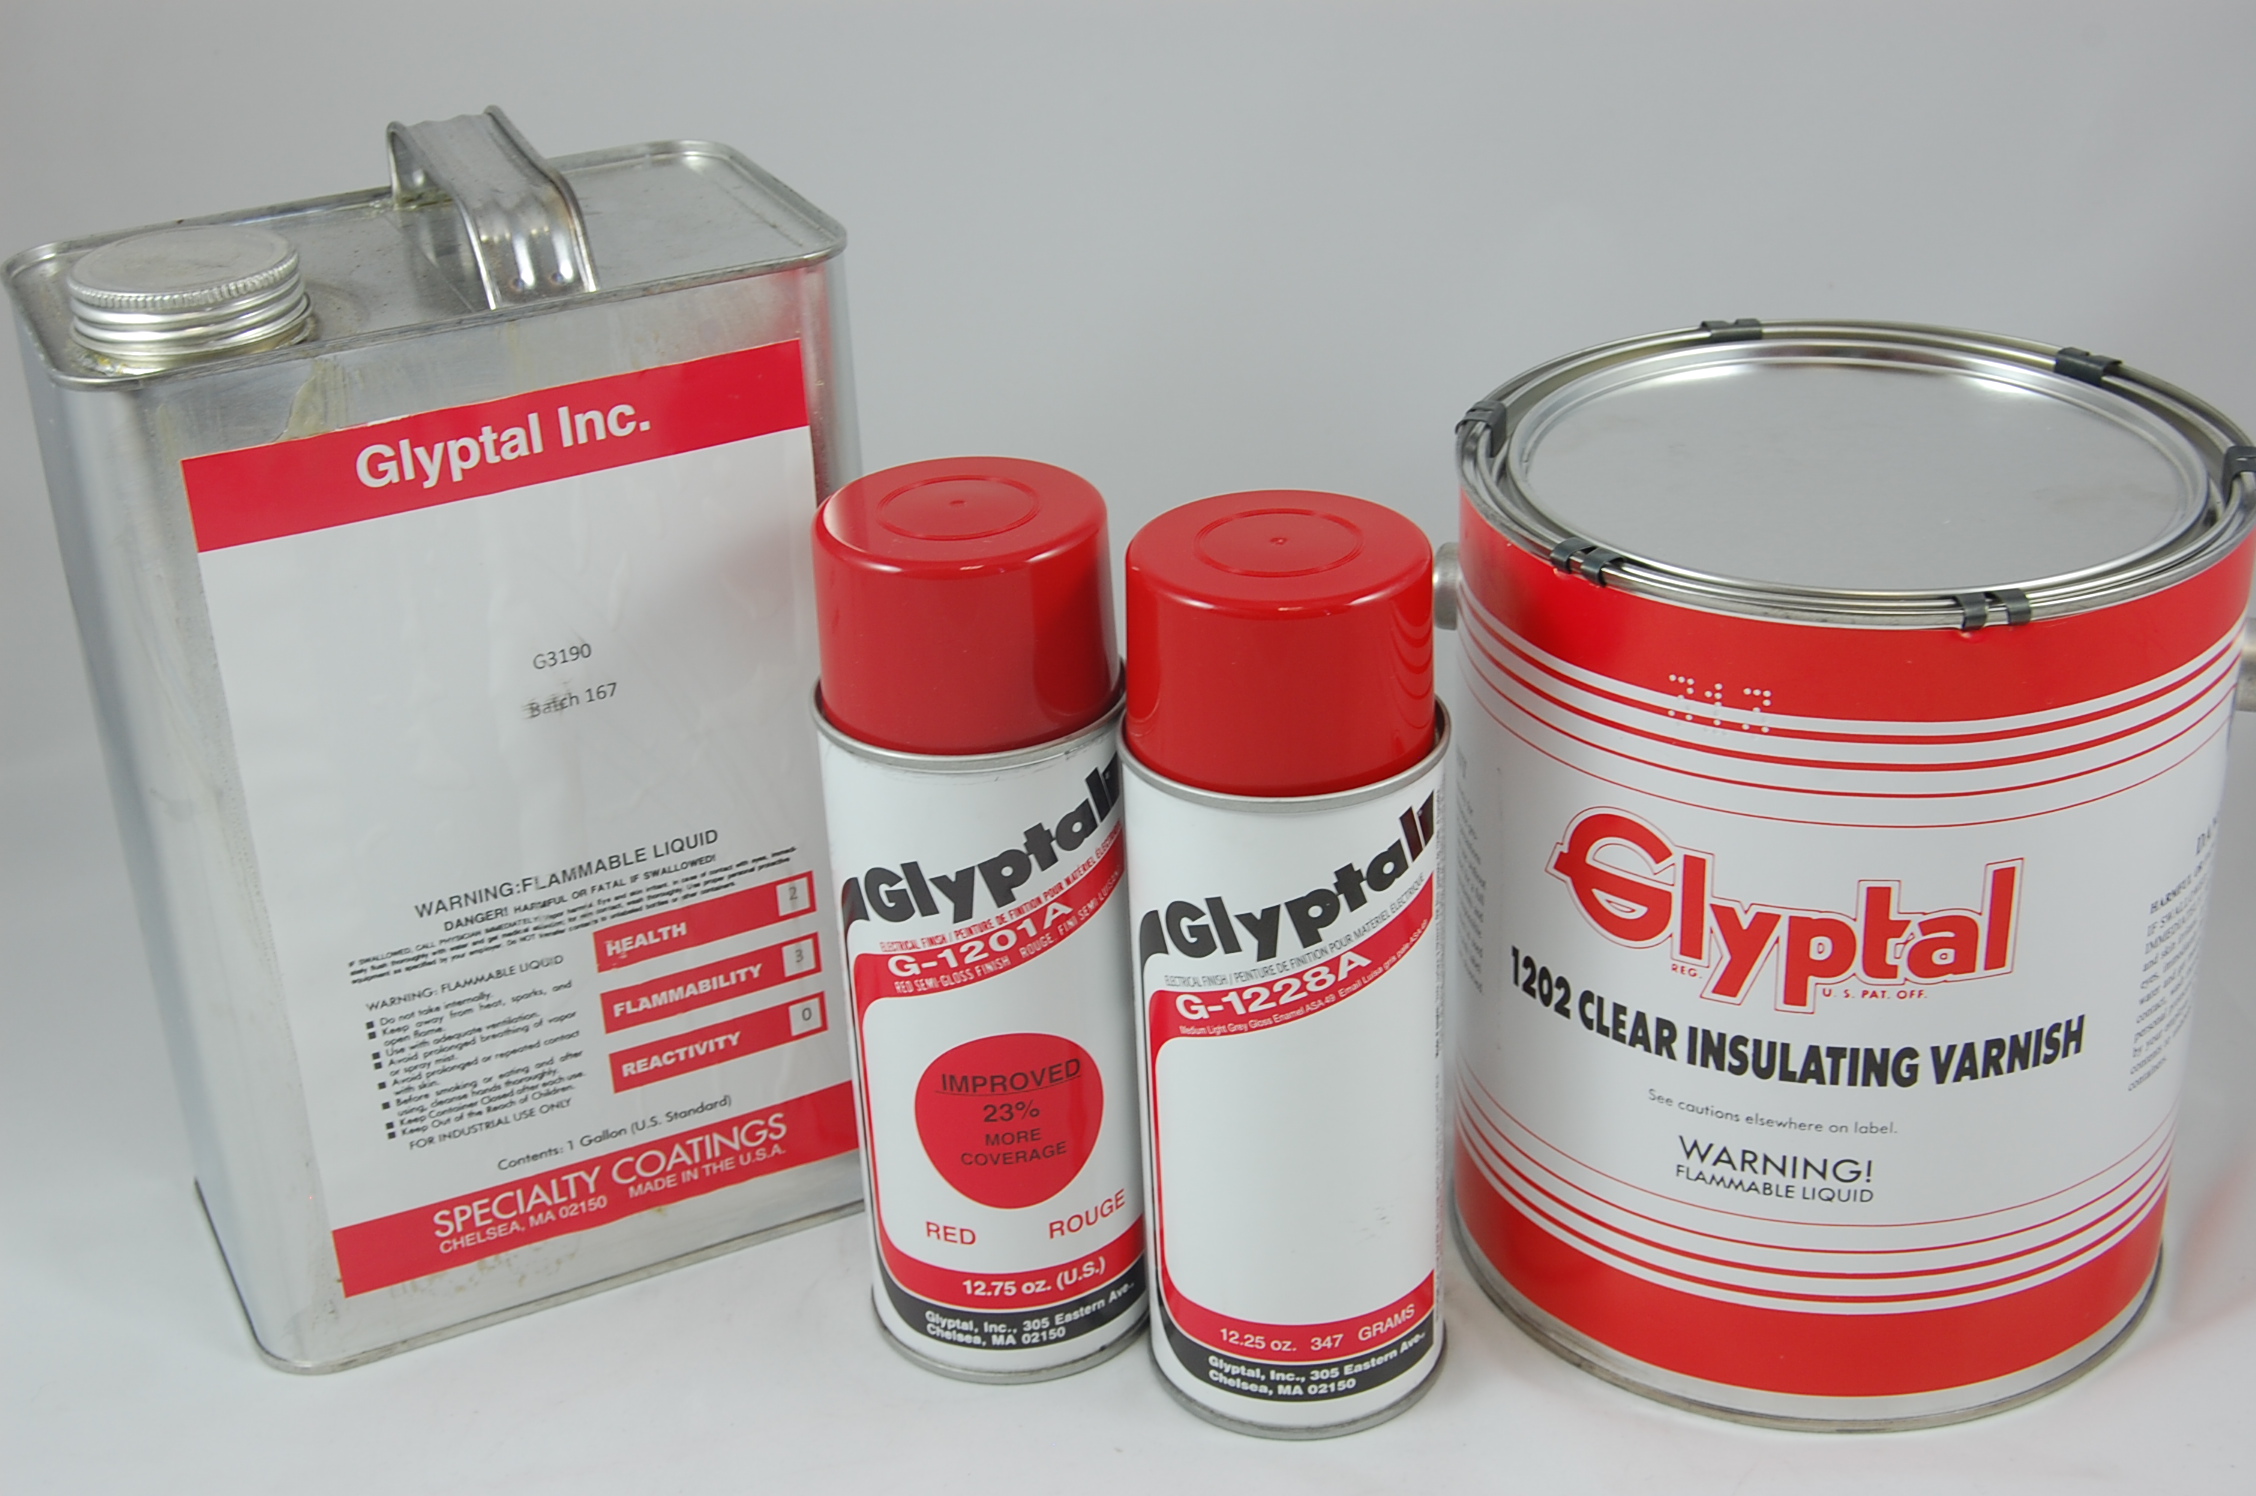 Glyptal 1201B High Viscosity All-Purpose Red Enamel Paint/Coating 130°C, red, 1 GALLON can